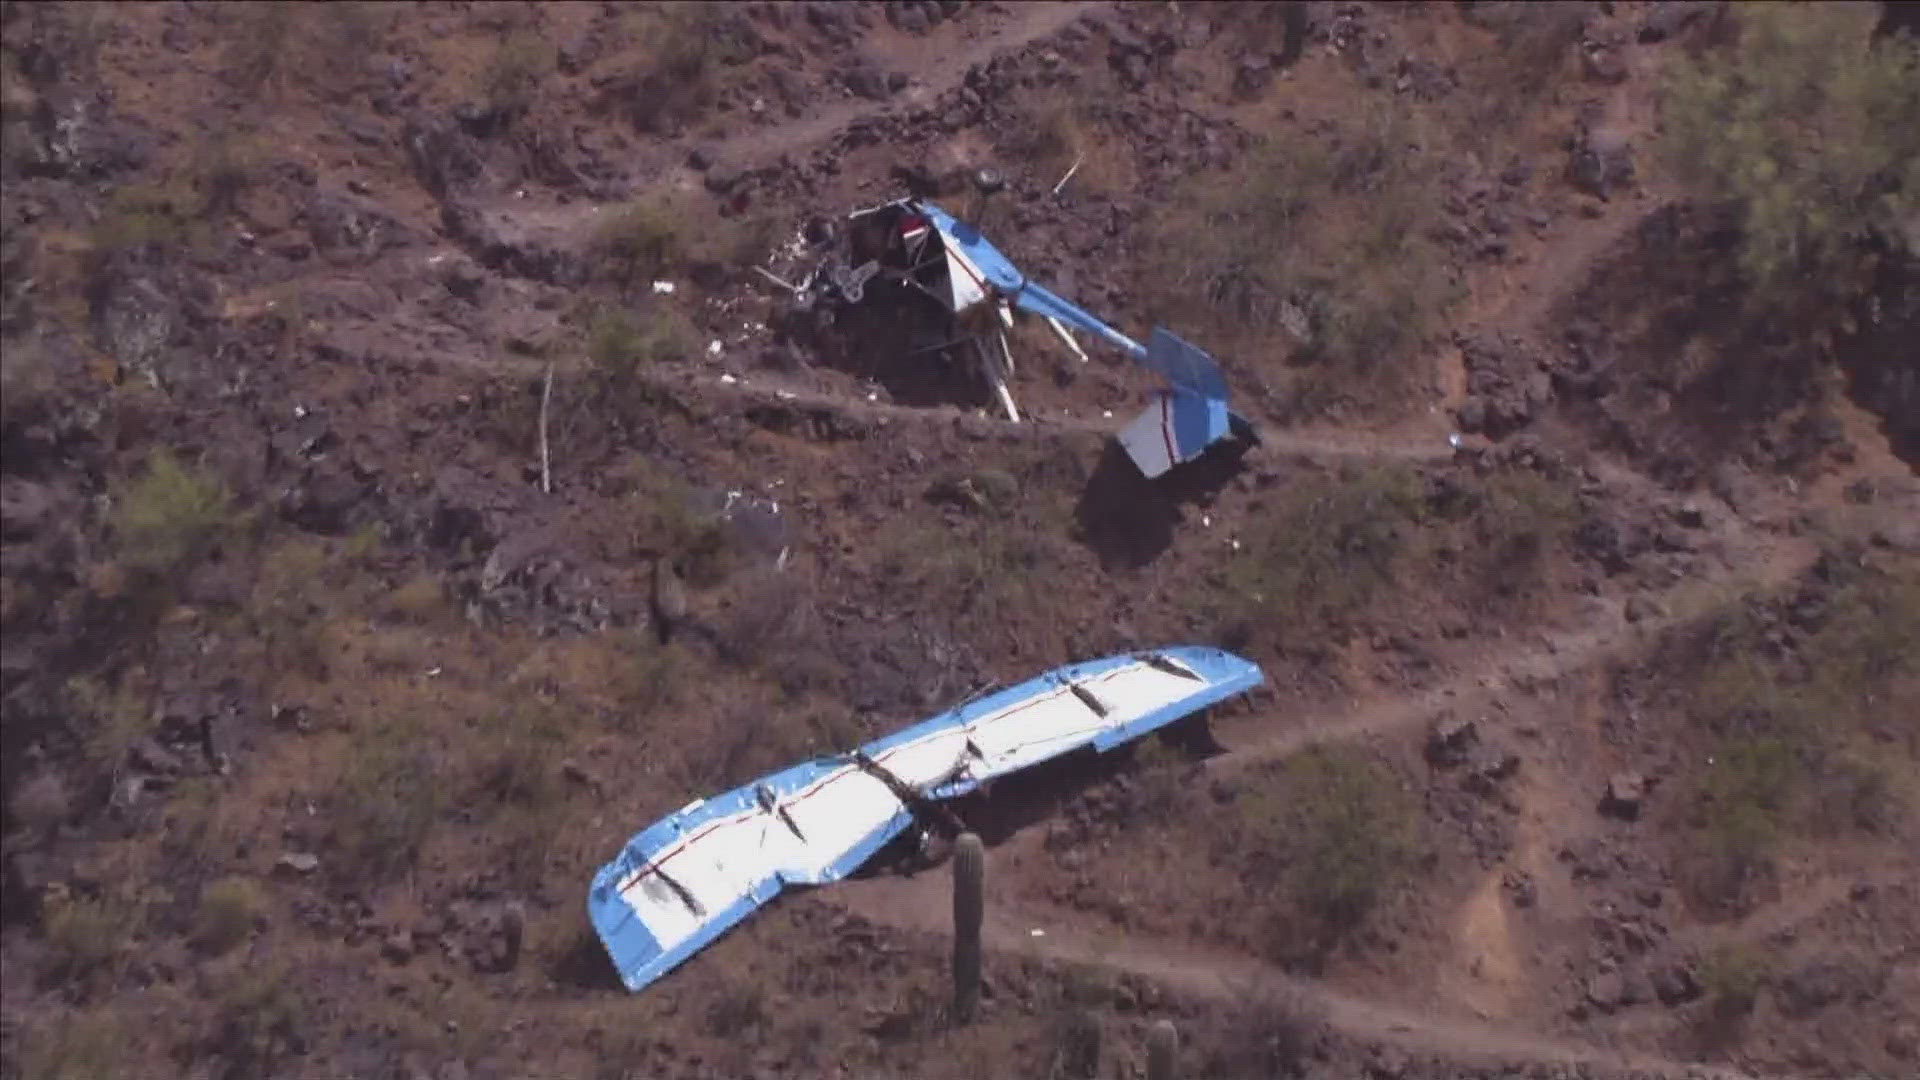 One day after 68-year-old James Galvin was killed in a crash on Picacho Peak in Arizona, the park surrounding the peak remains closed. Watch the video for more.